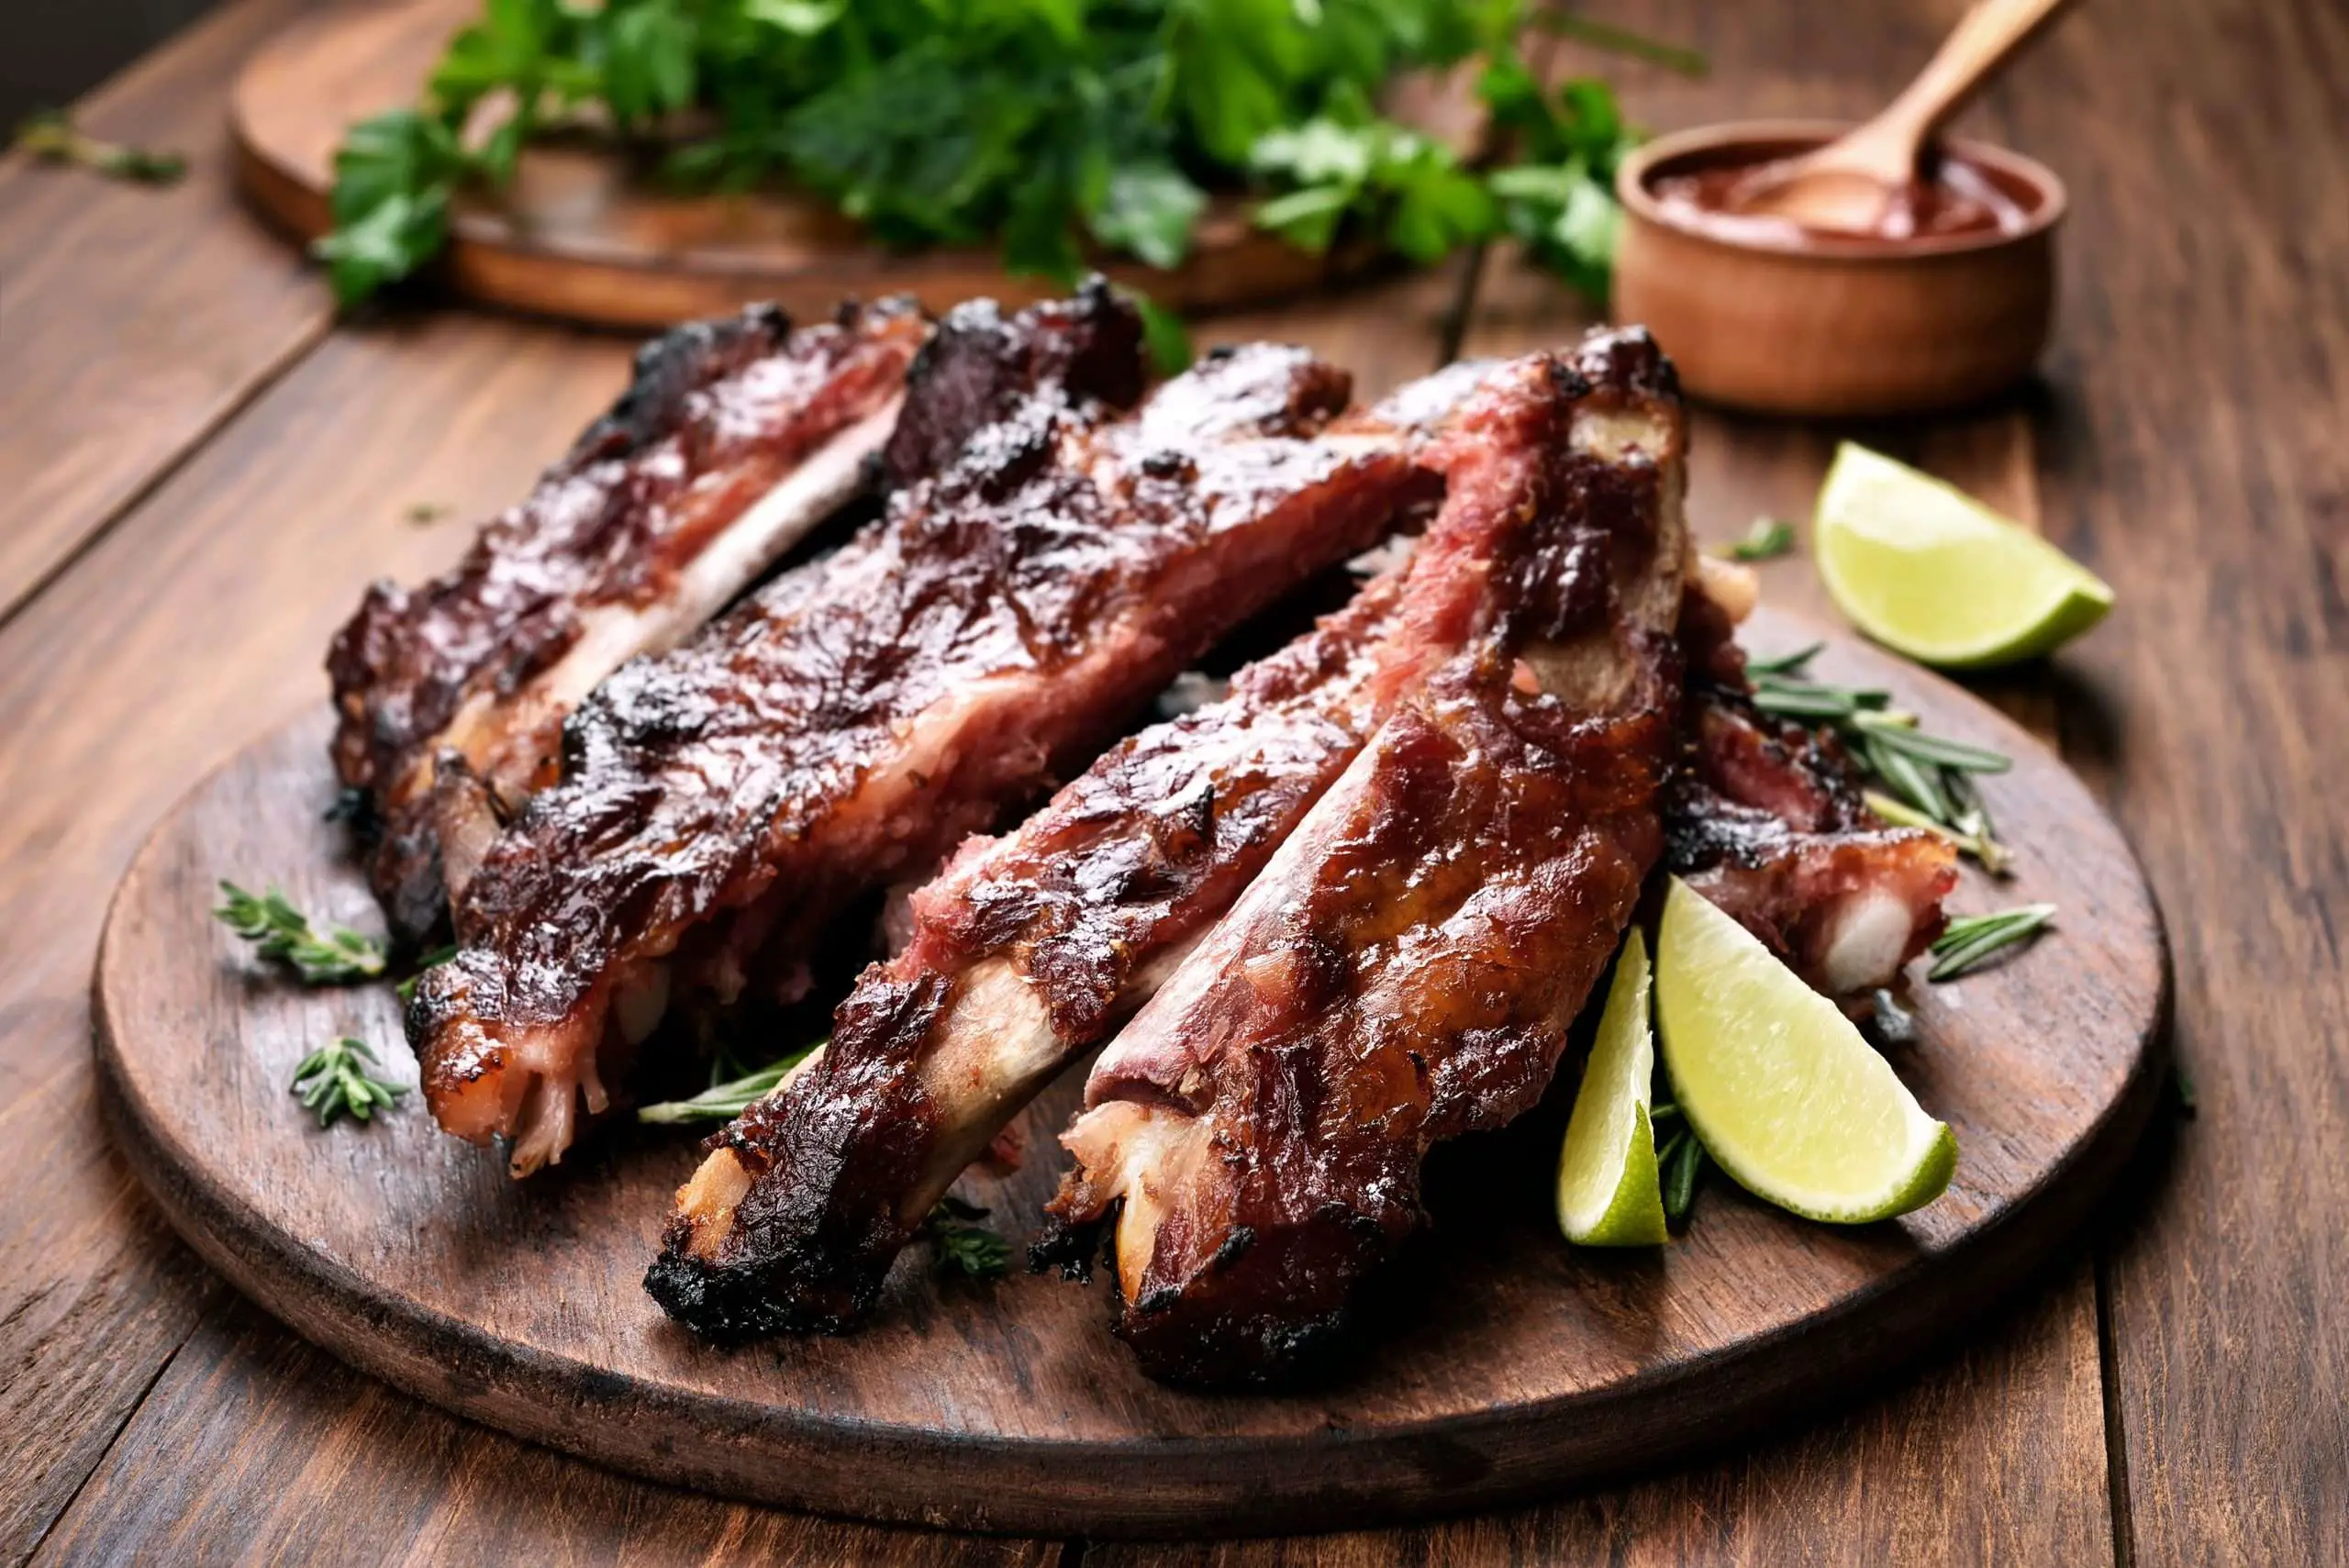 How Long Should You Boil Spareribs Before Grilling?